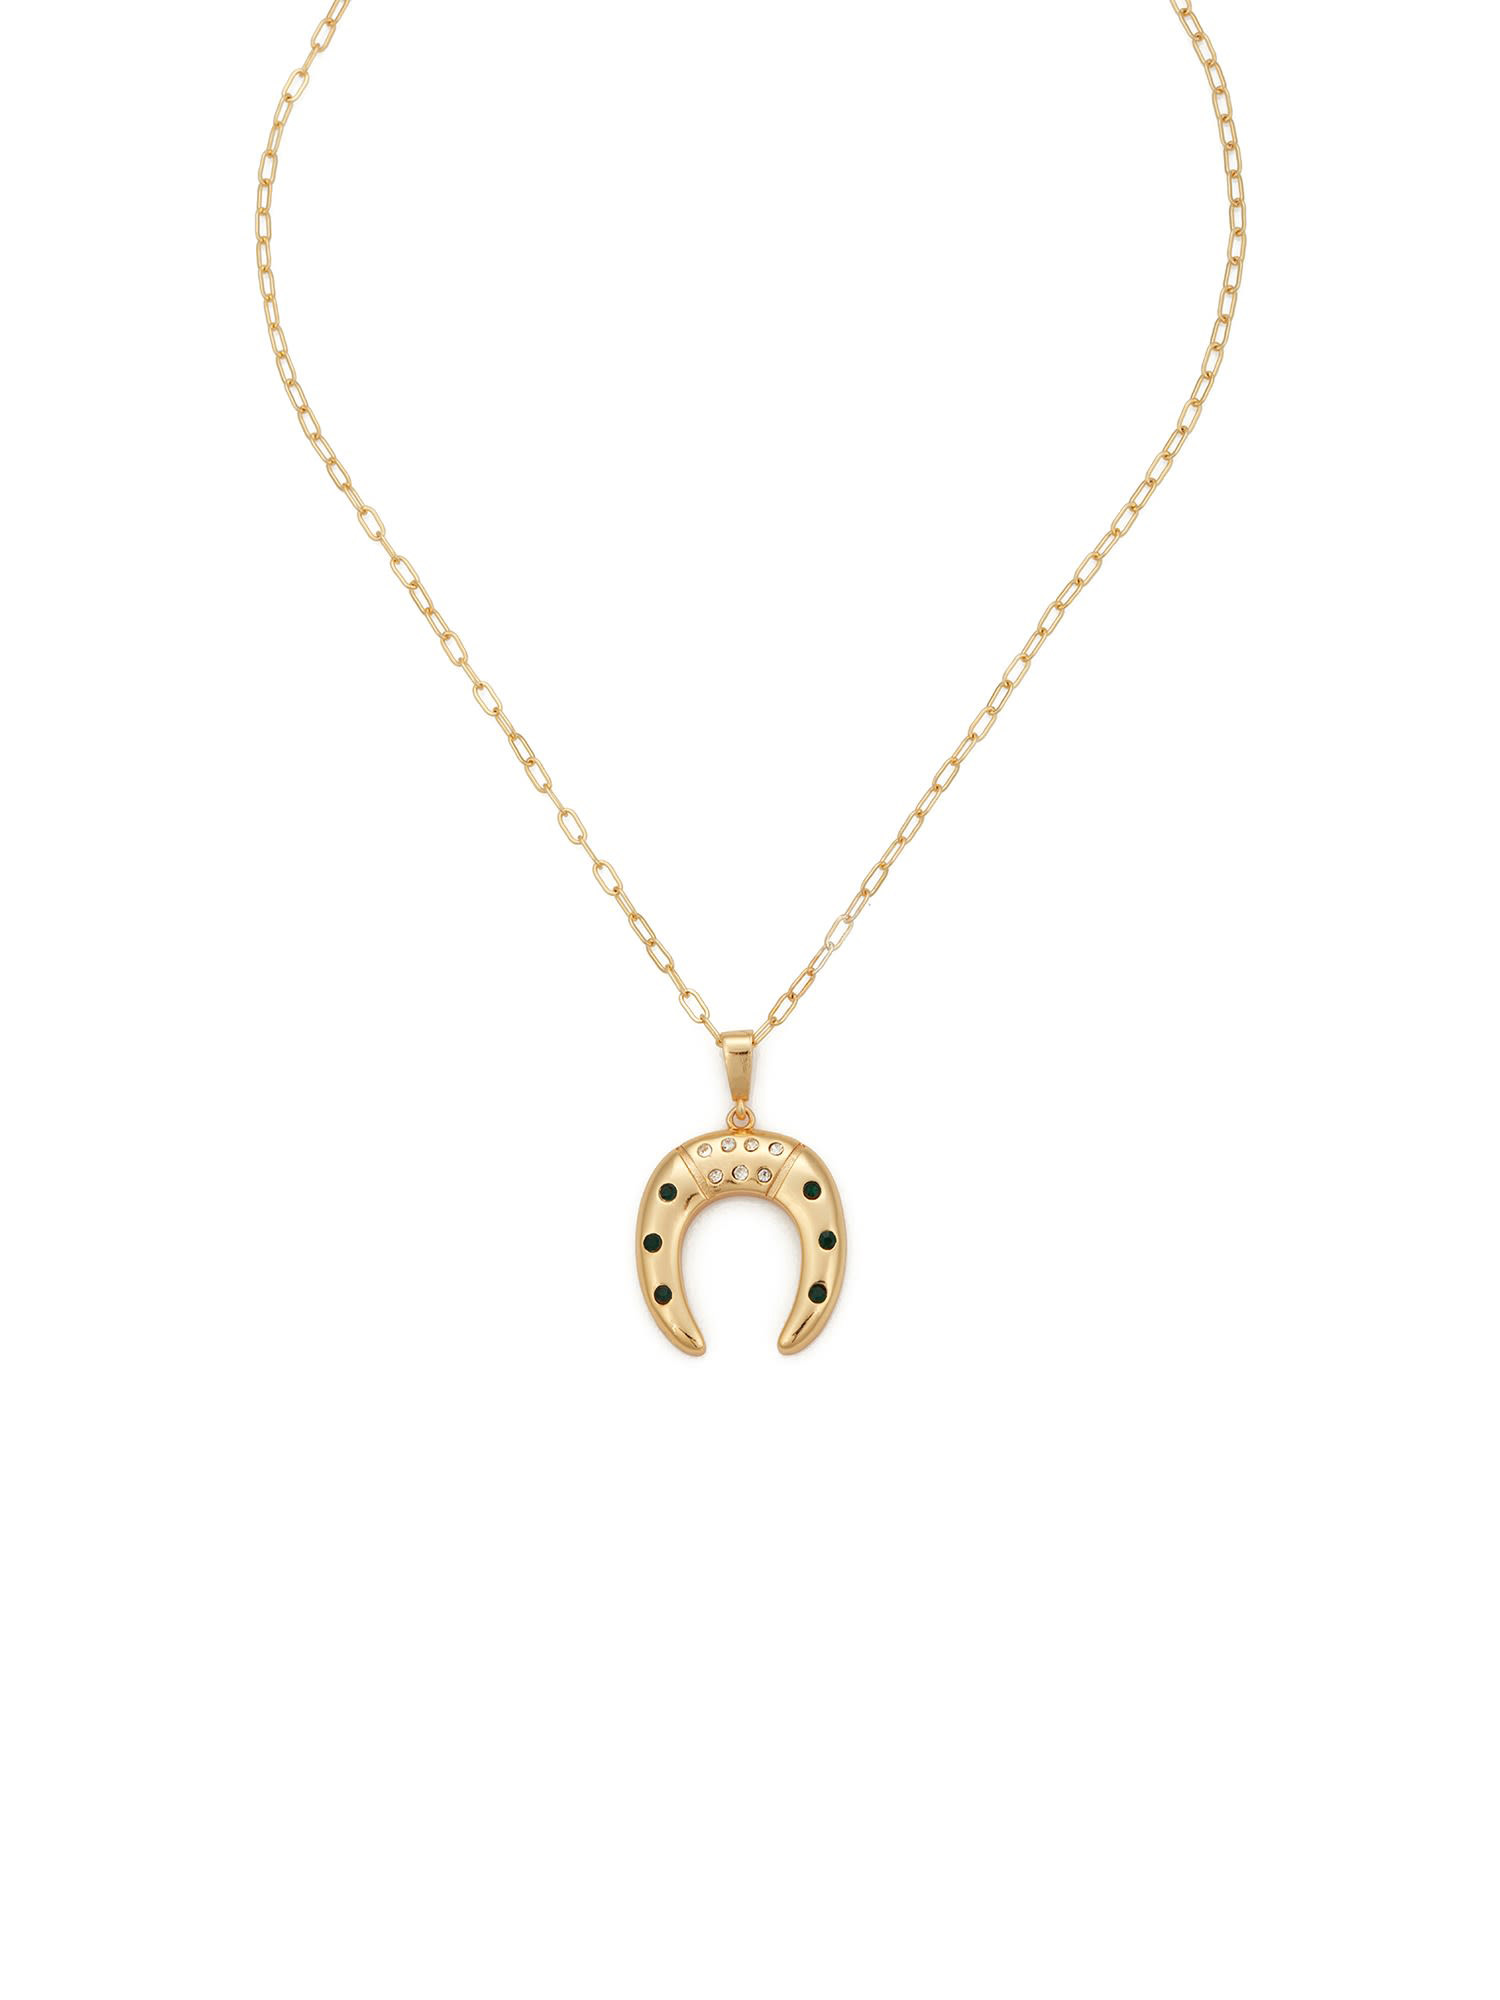 THE VANDAL NECKLACE GOLD